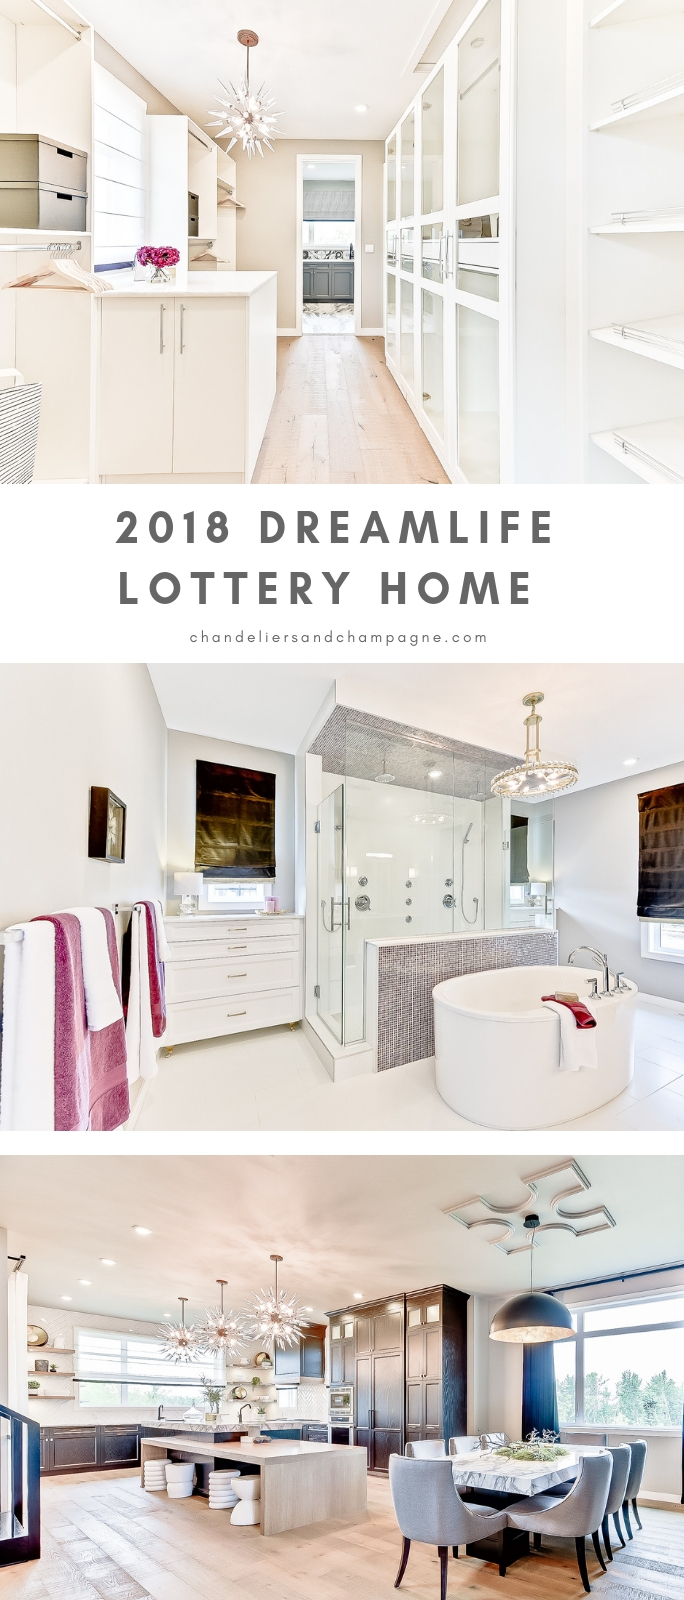 Bright white home inspiration - Luxury home inspiration - Dream home with white bathroom and oversized kitchen - 2018 Edmonton DreamLife Lottery Home